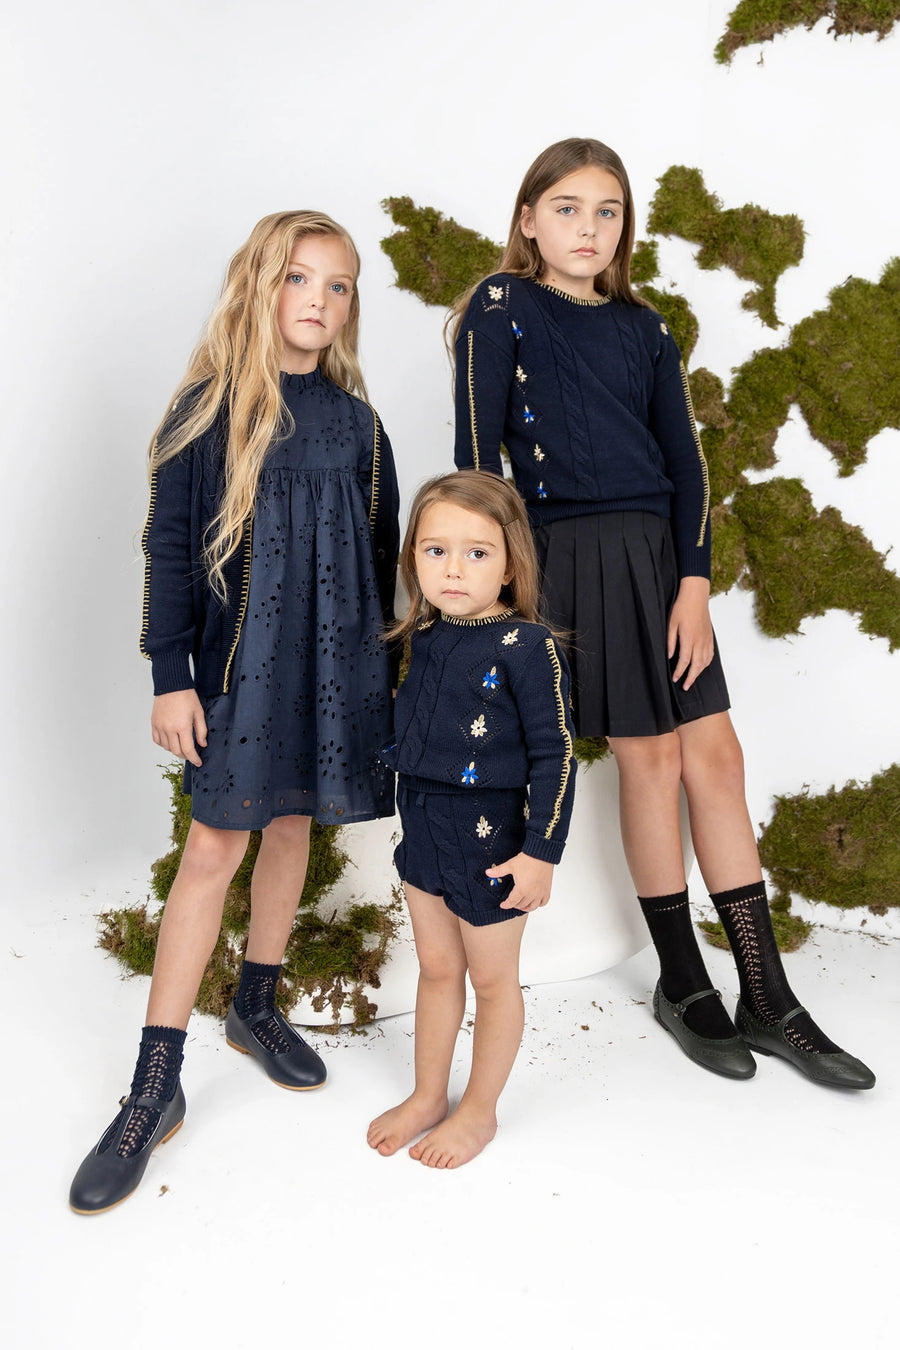 NAVY EMBROIDERED FLORAL KNIT BABY SET